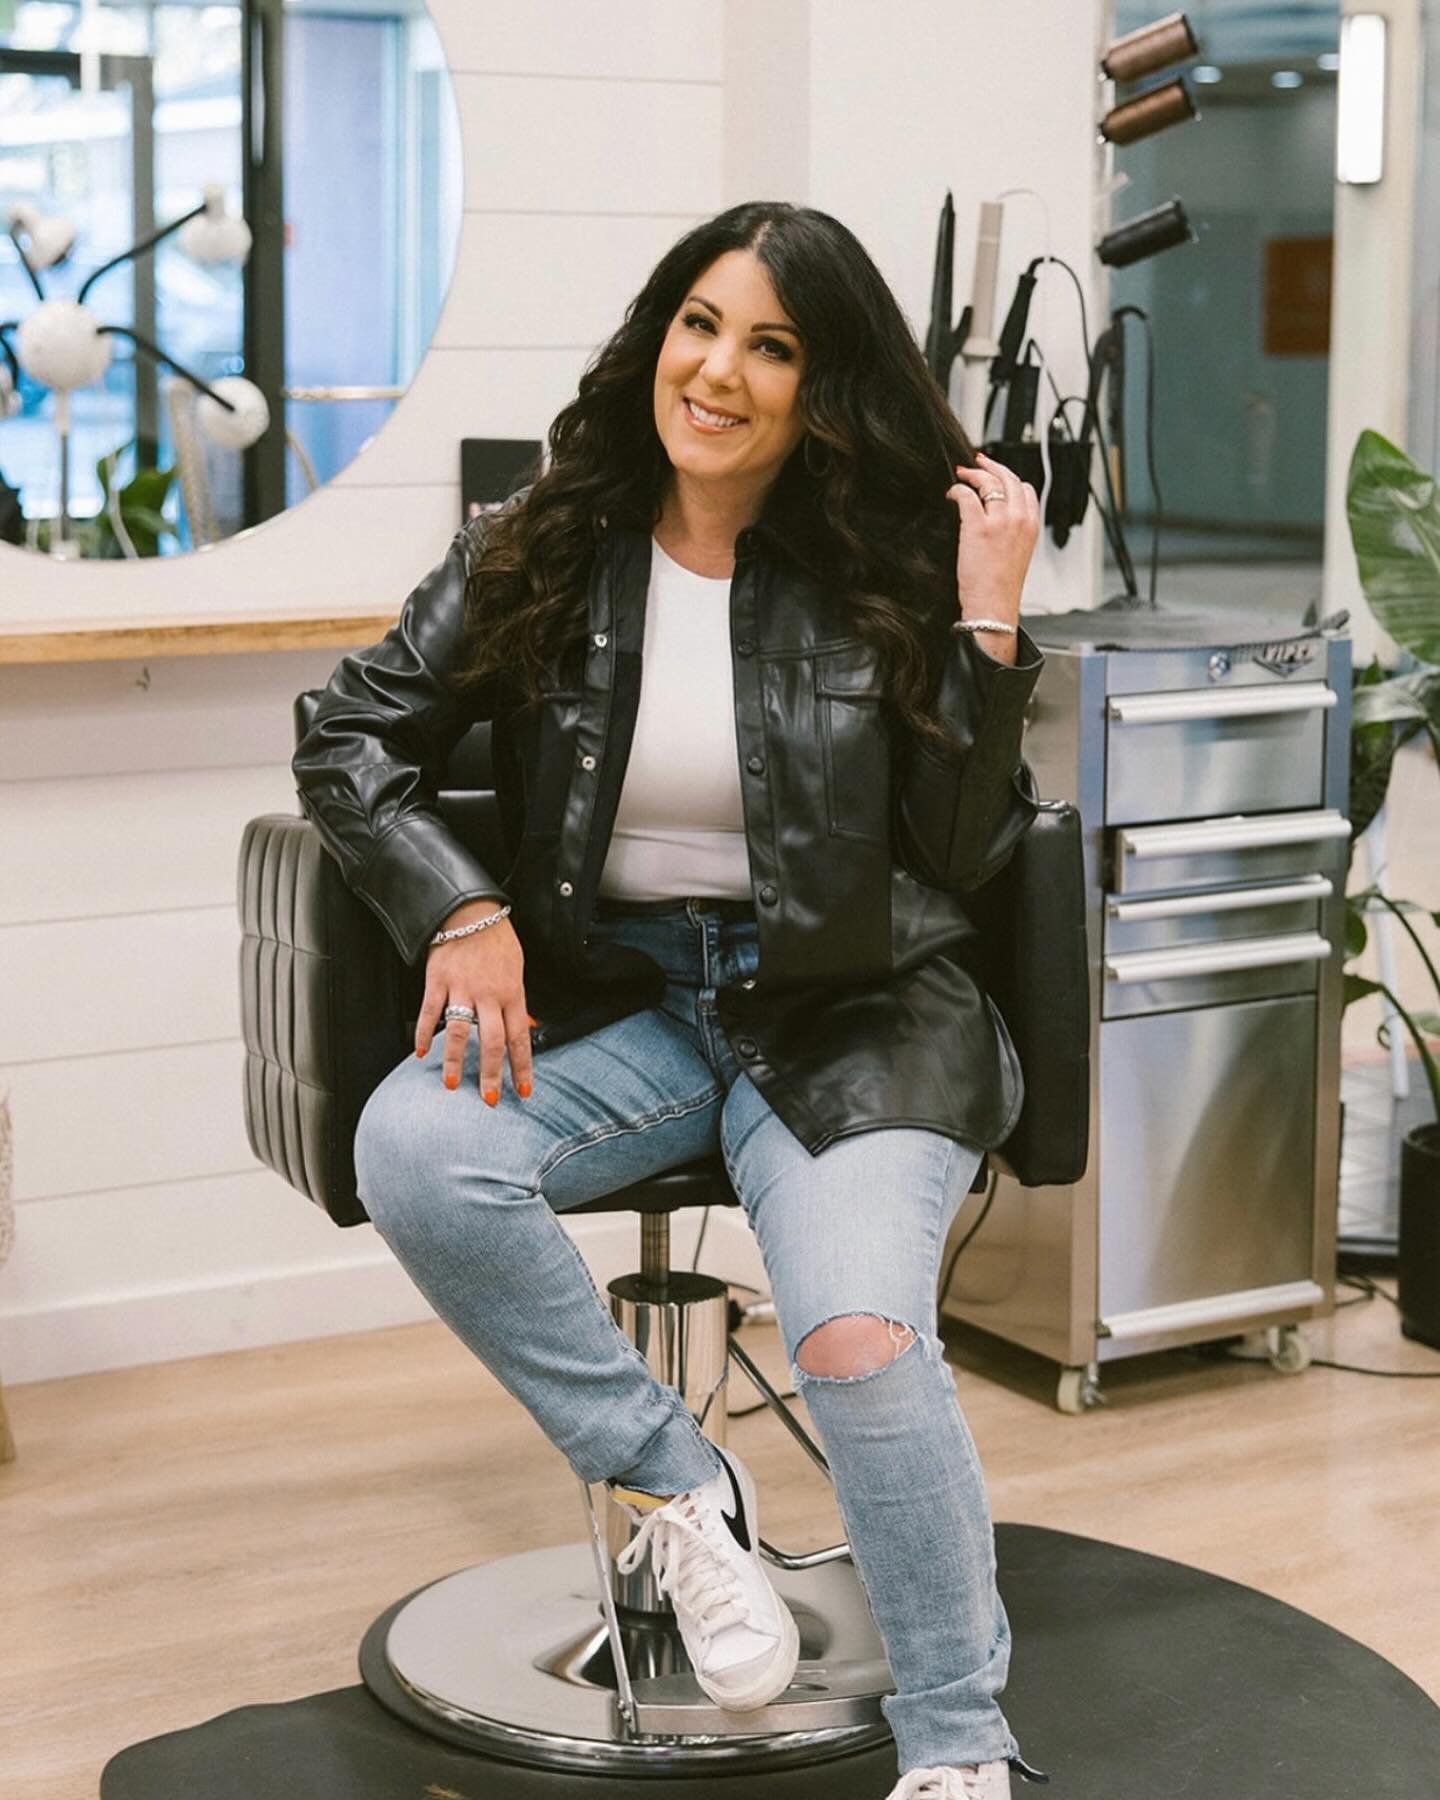 I see a lot of new faces that I&rsquo;ve loved meeting and connecting with on here!

Just a little about me&hellip;

I&rsquo;m a salon owner and full time stylist behind the chair along with being a Cutting Educator for @invisiblebeadextensions. On t